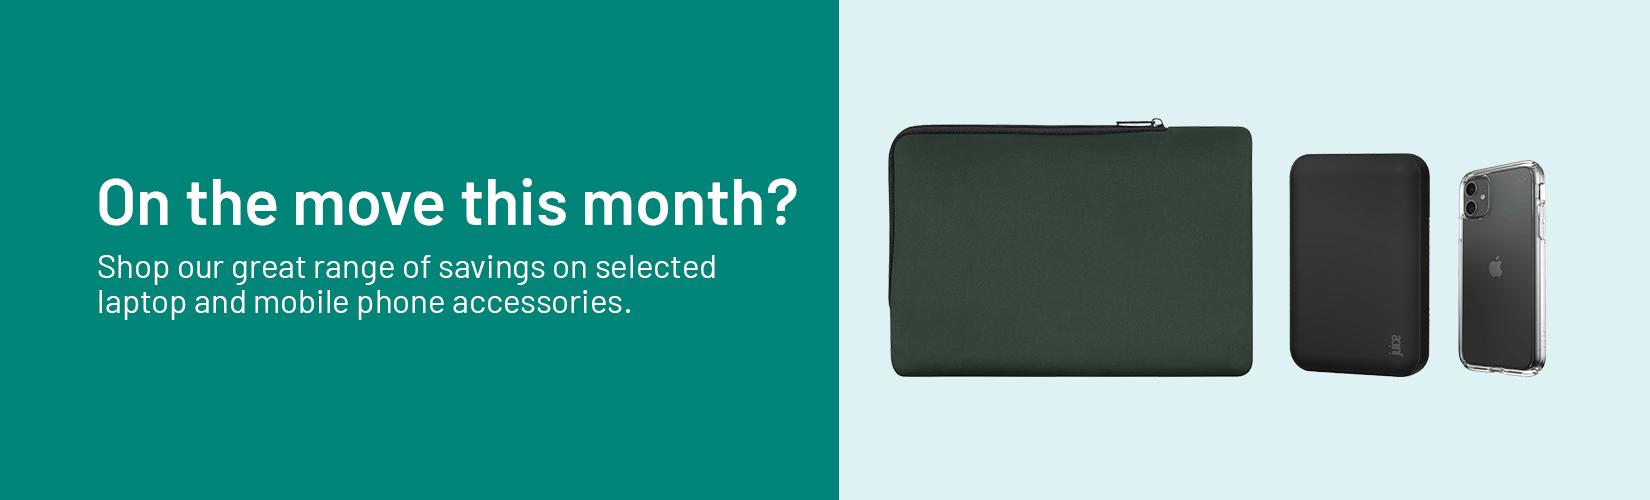 On the move this month? Shop our great range of savings on selected laptop and mobile phone accessories.